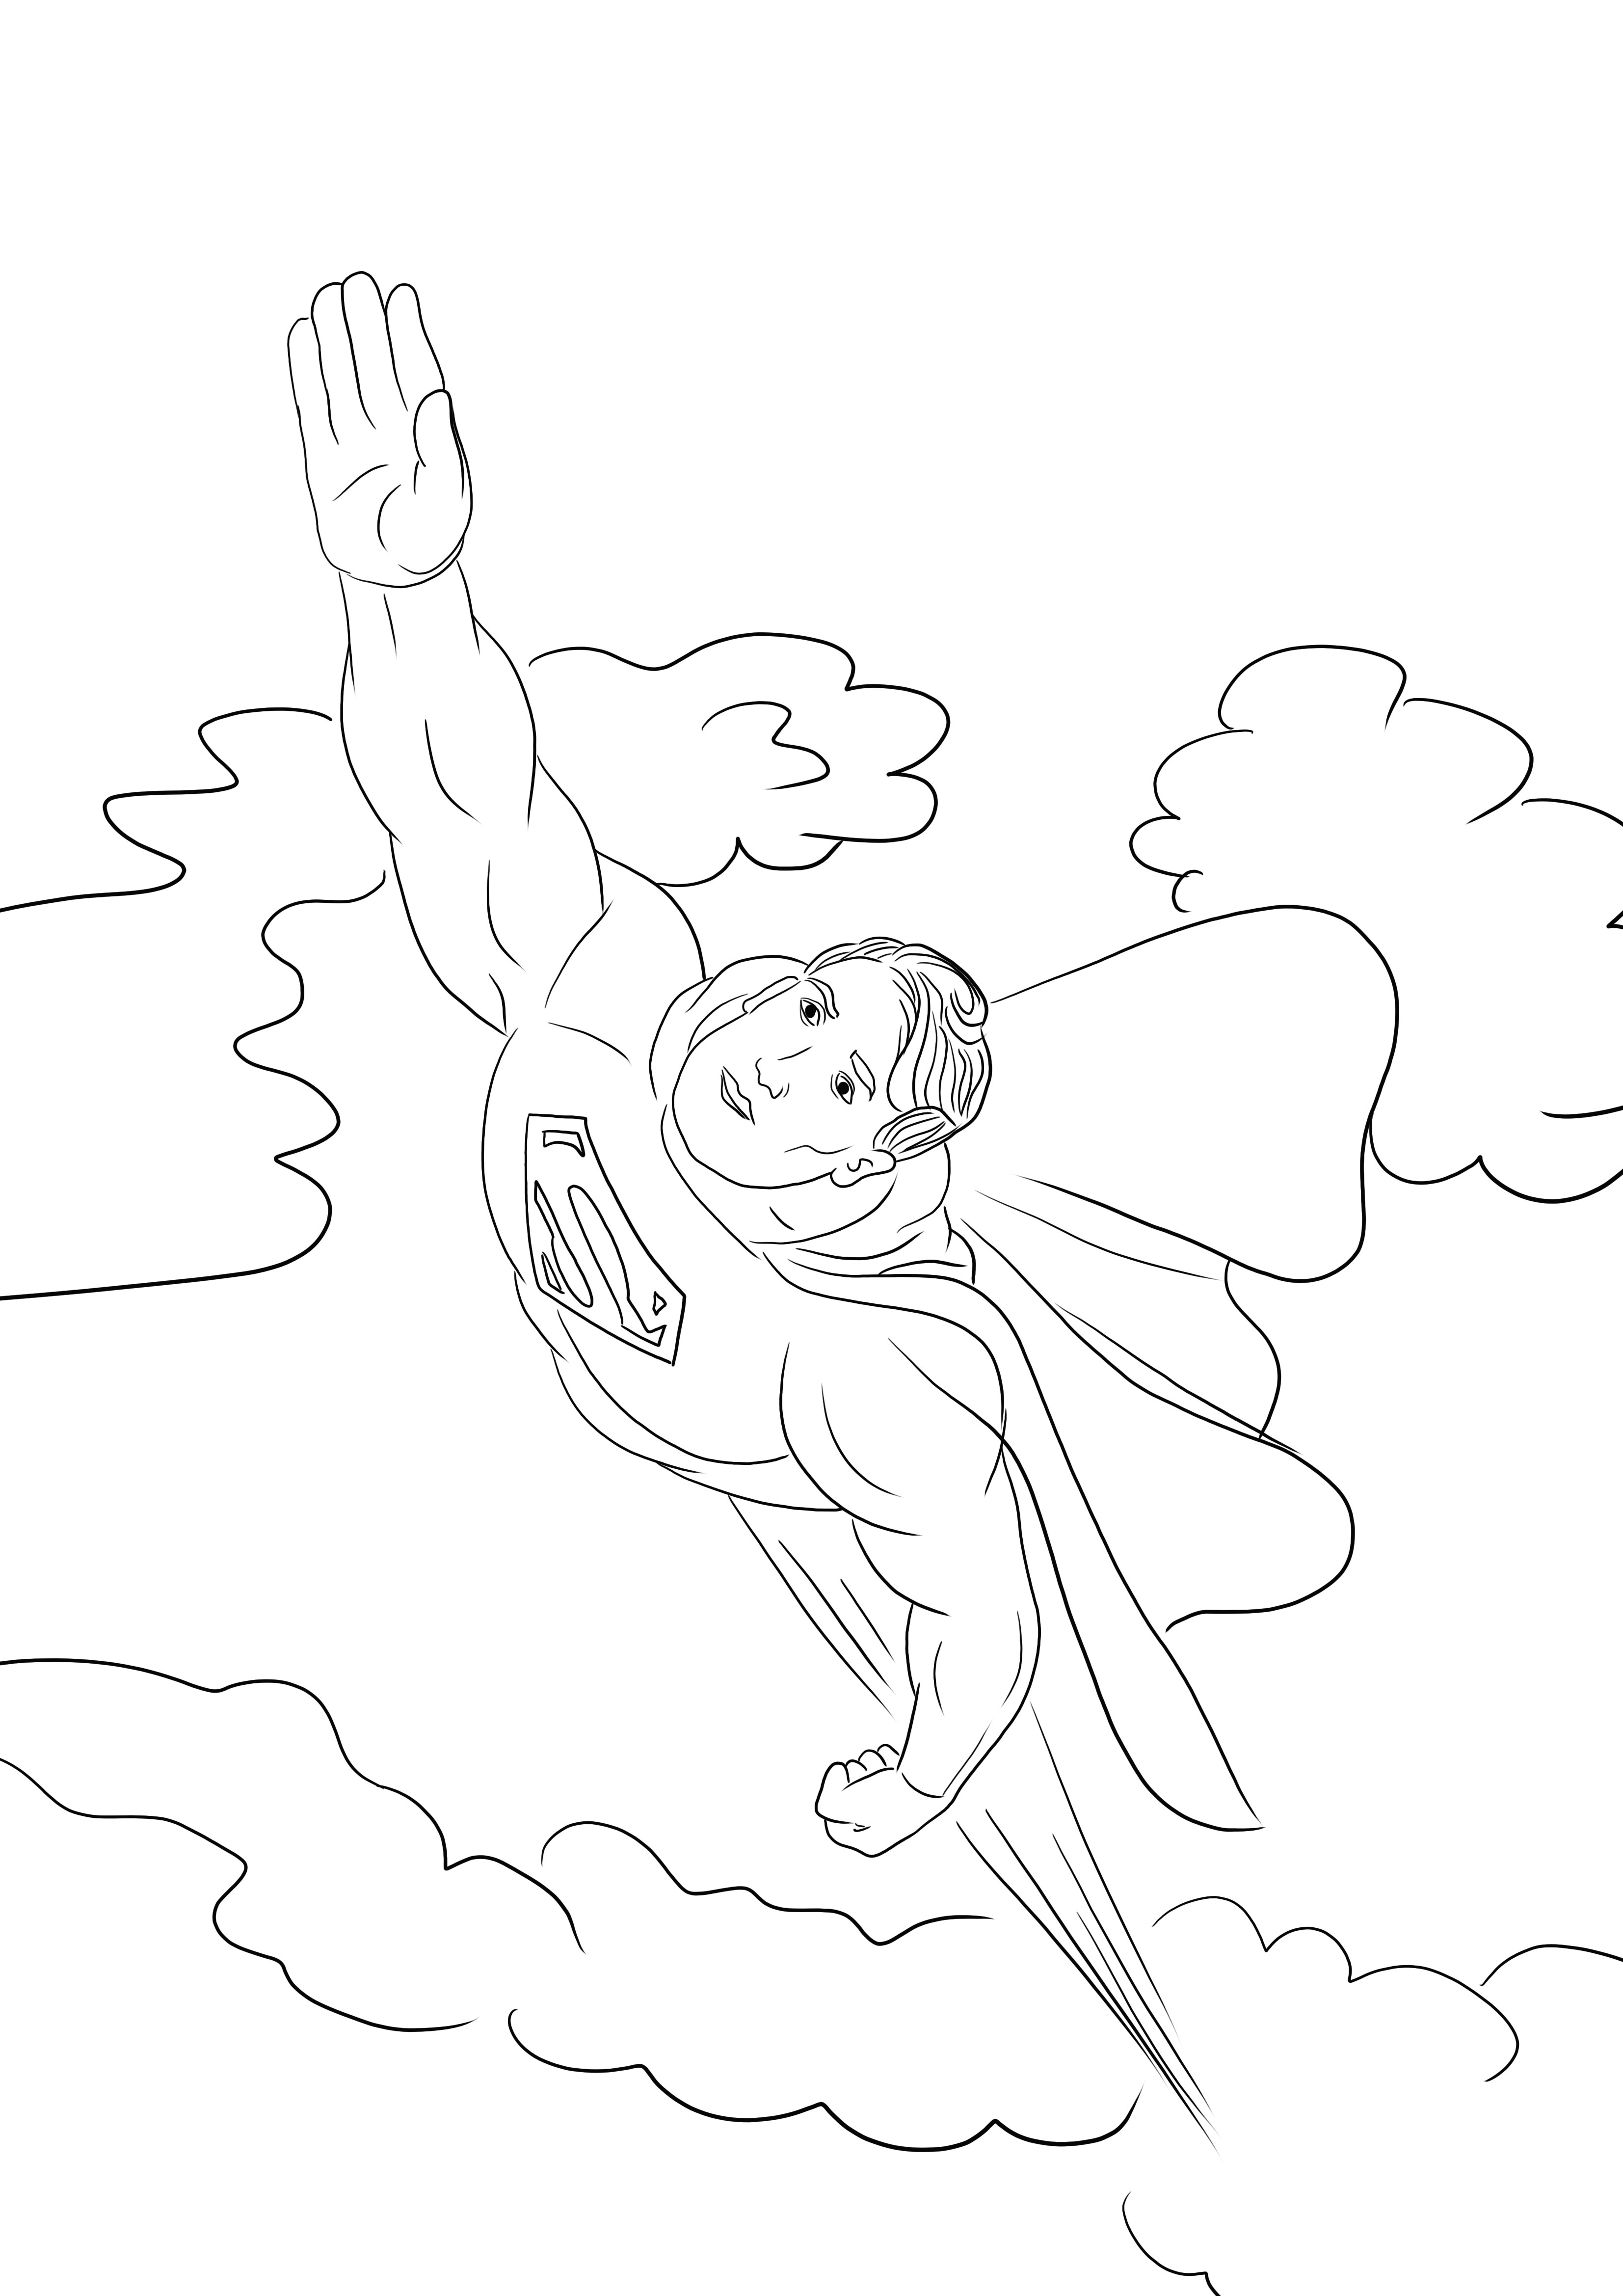 Superman in the sky freebie to print and color for kids of all ages